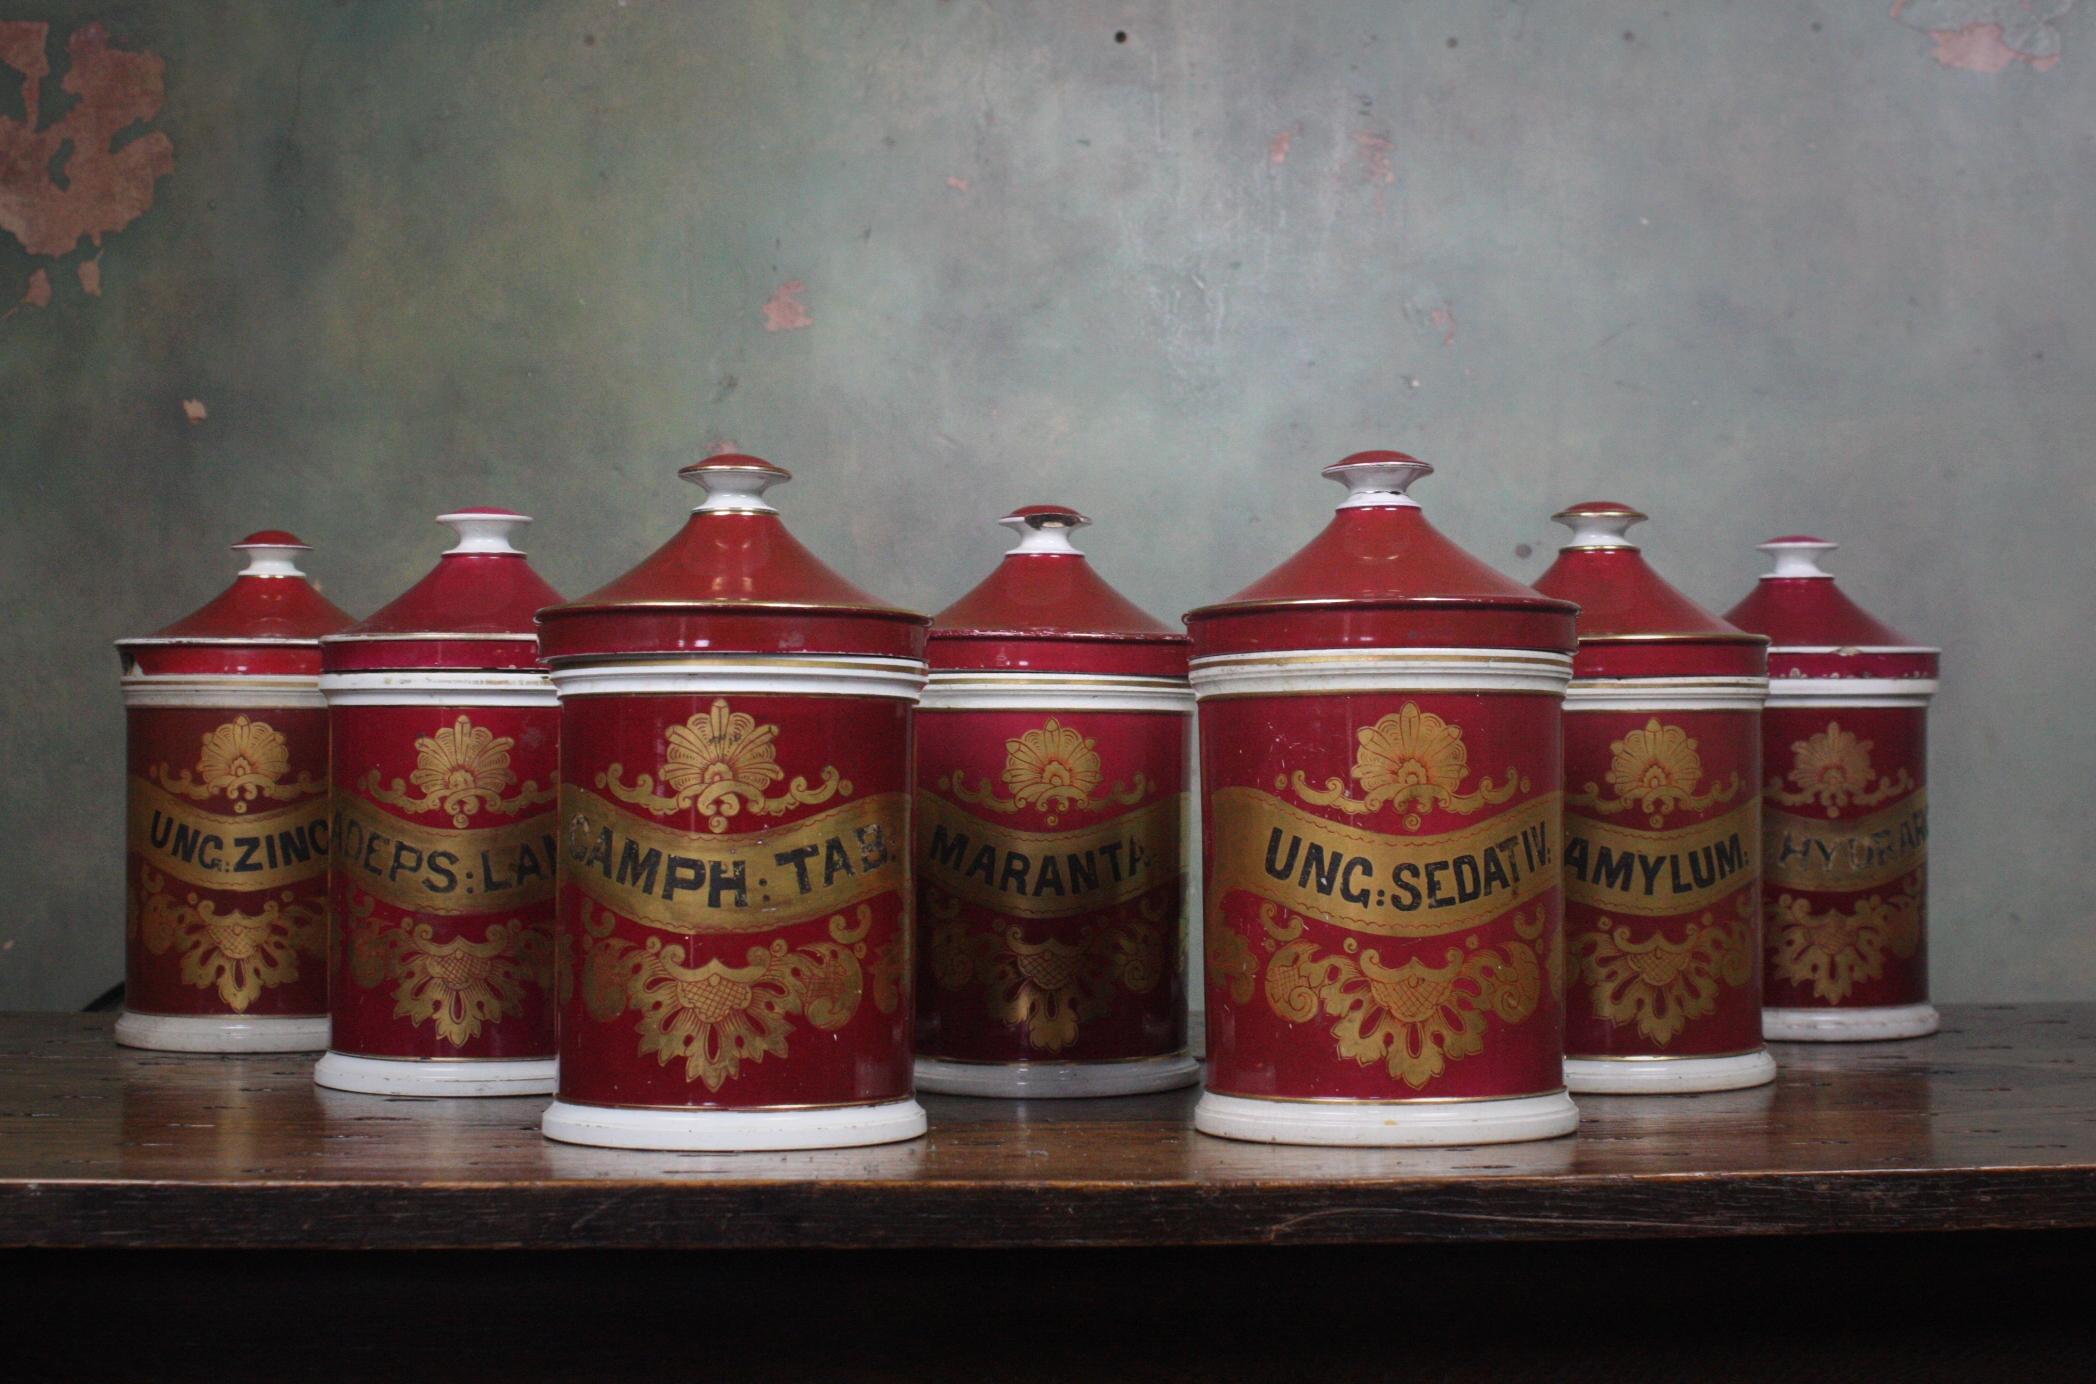 Rare collection of seven crimson red stoneware and glazed dispensing jars with hand painting gilt labels

These where made by Mottershead & Co of Manchester Established 1790 

circa 1850 in age 

Three lids are damaged, with elderly repairs.